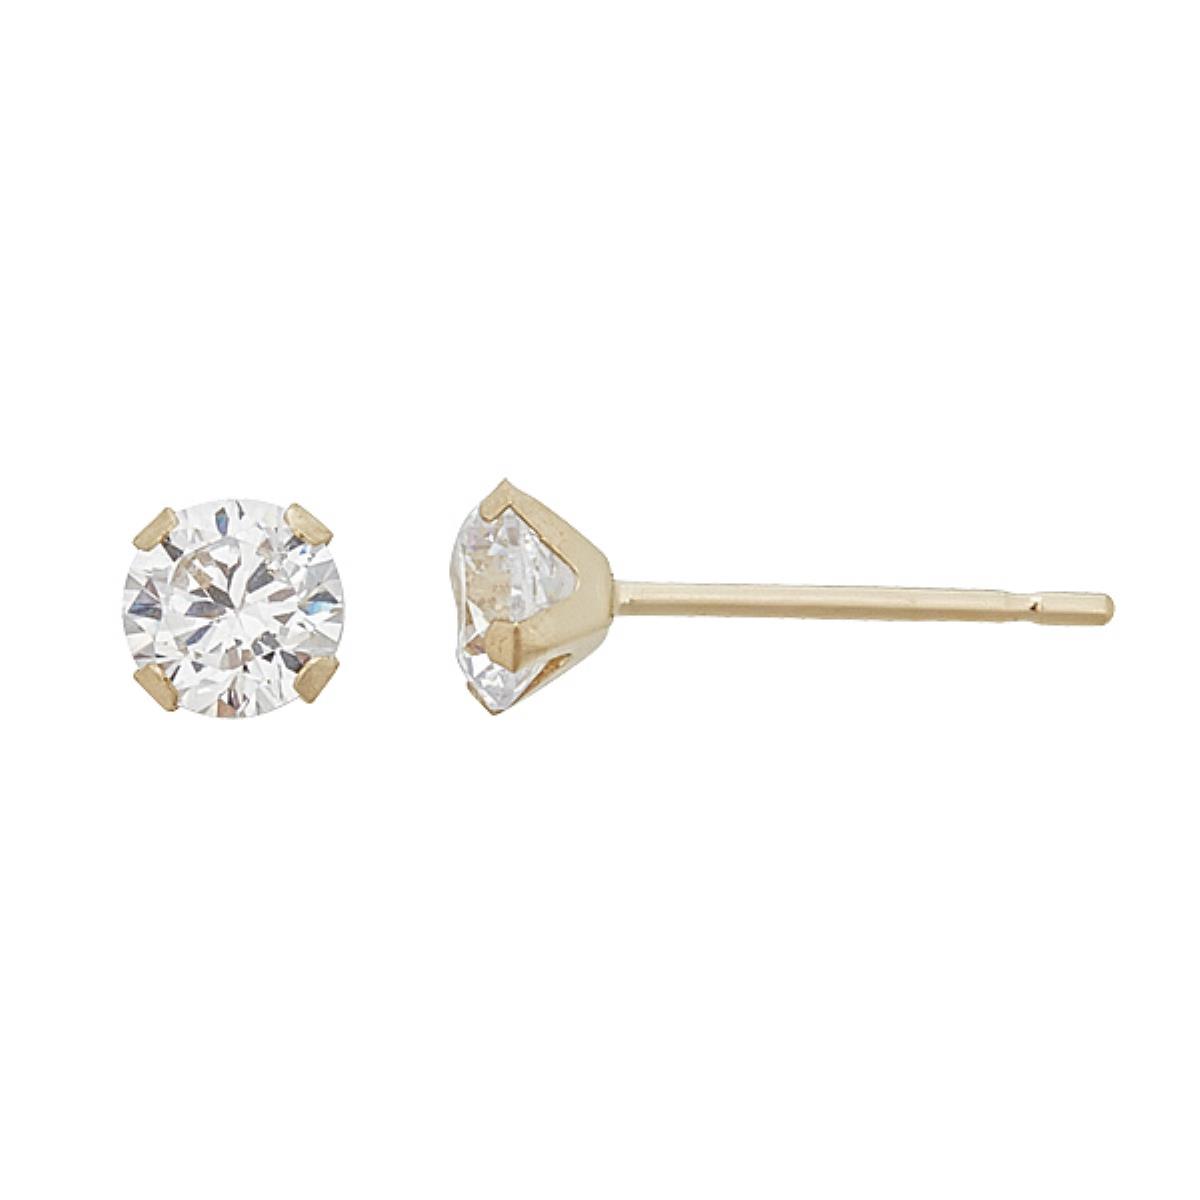 10K Yellow Gold 4mm Martini Round Cut Solitaire Stud Earring